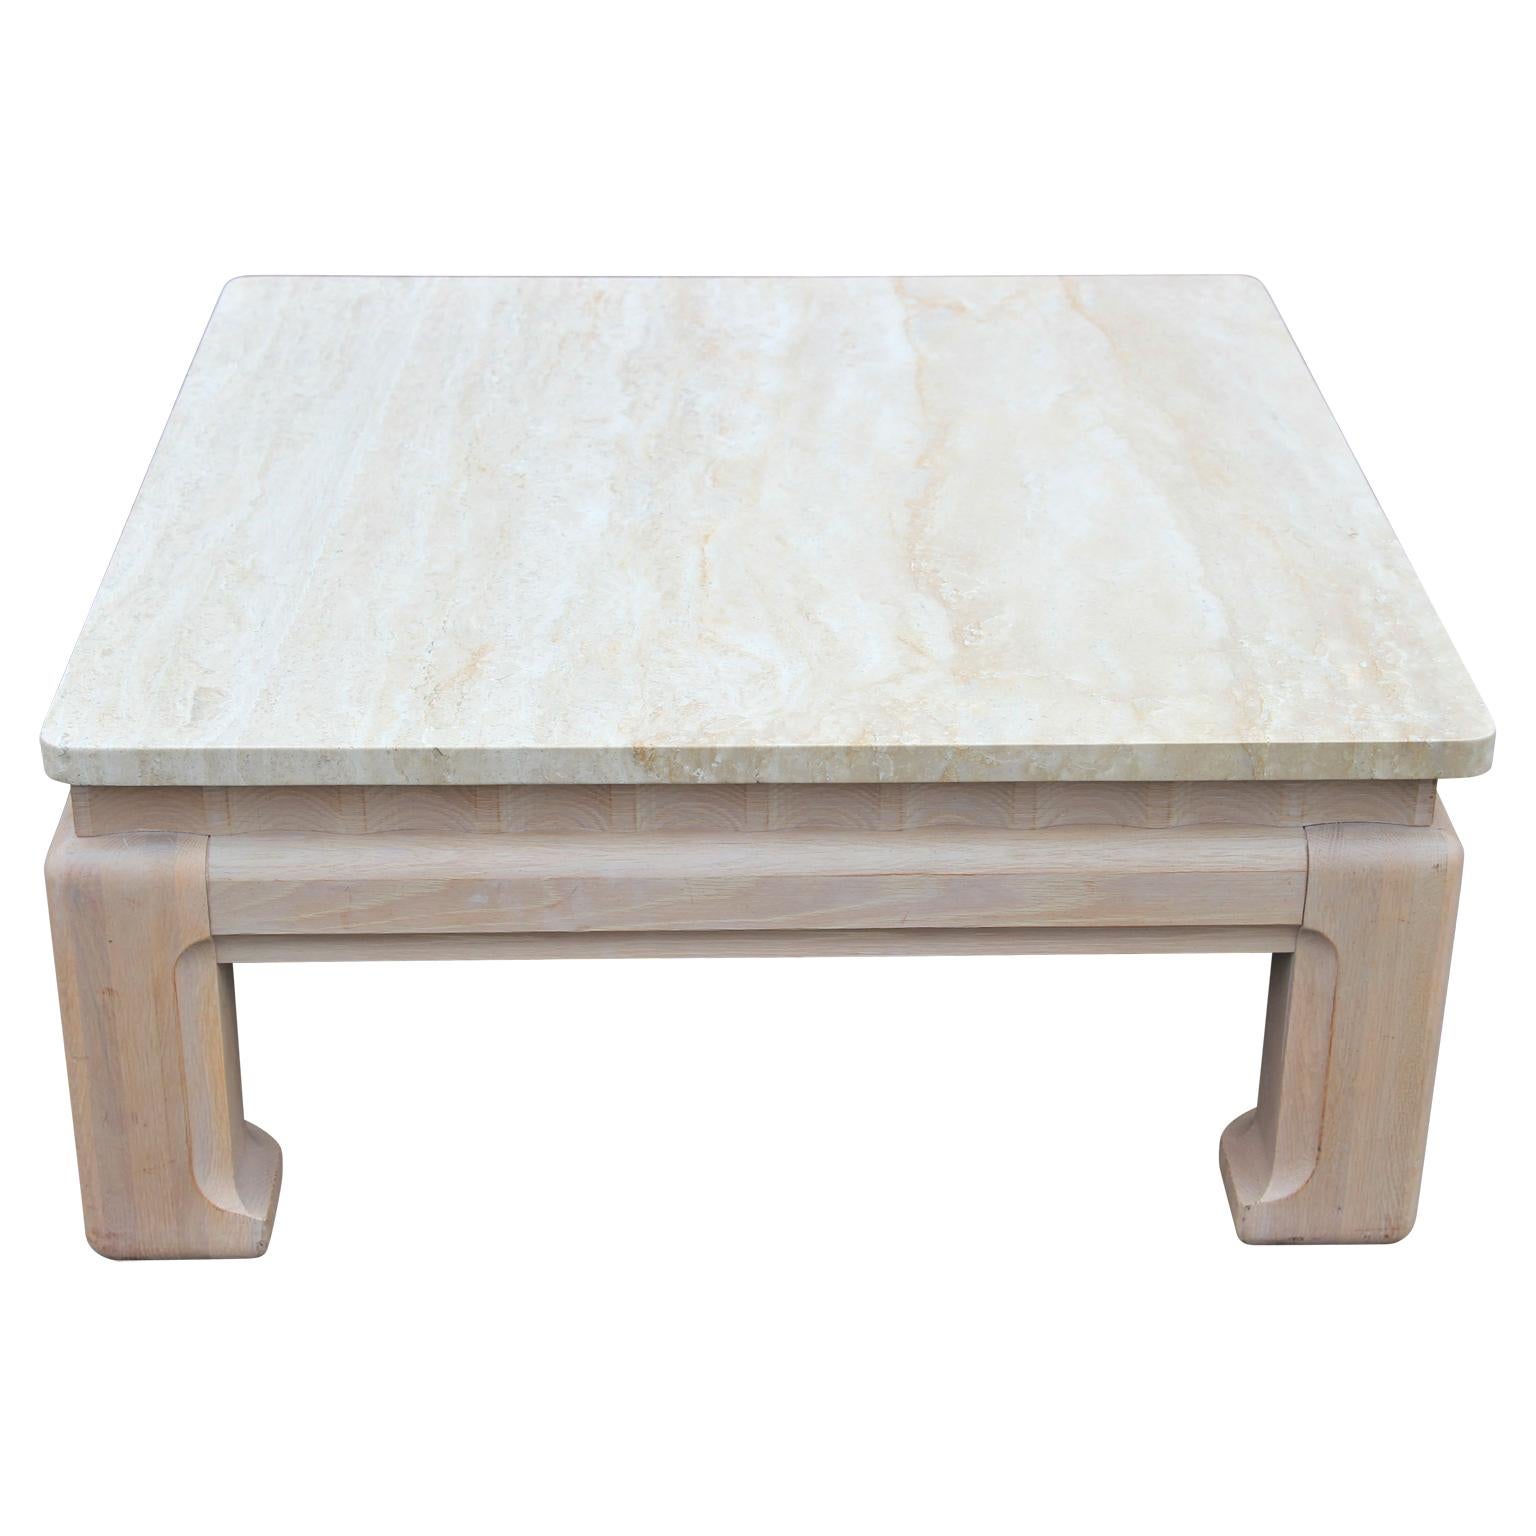 Square ming modern travertine coffee table with bleached cerused oak base. Possibly by Jay Spectre. Excellent quality and design. Made Circa 1990s.